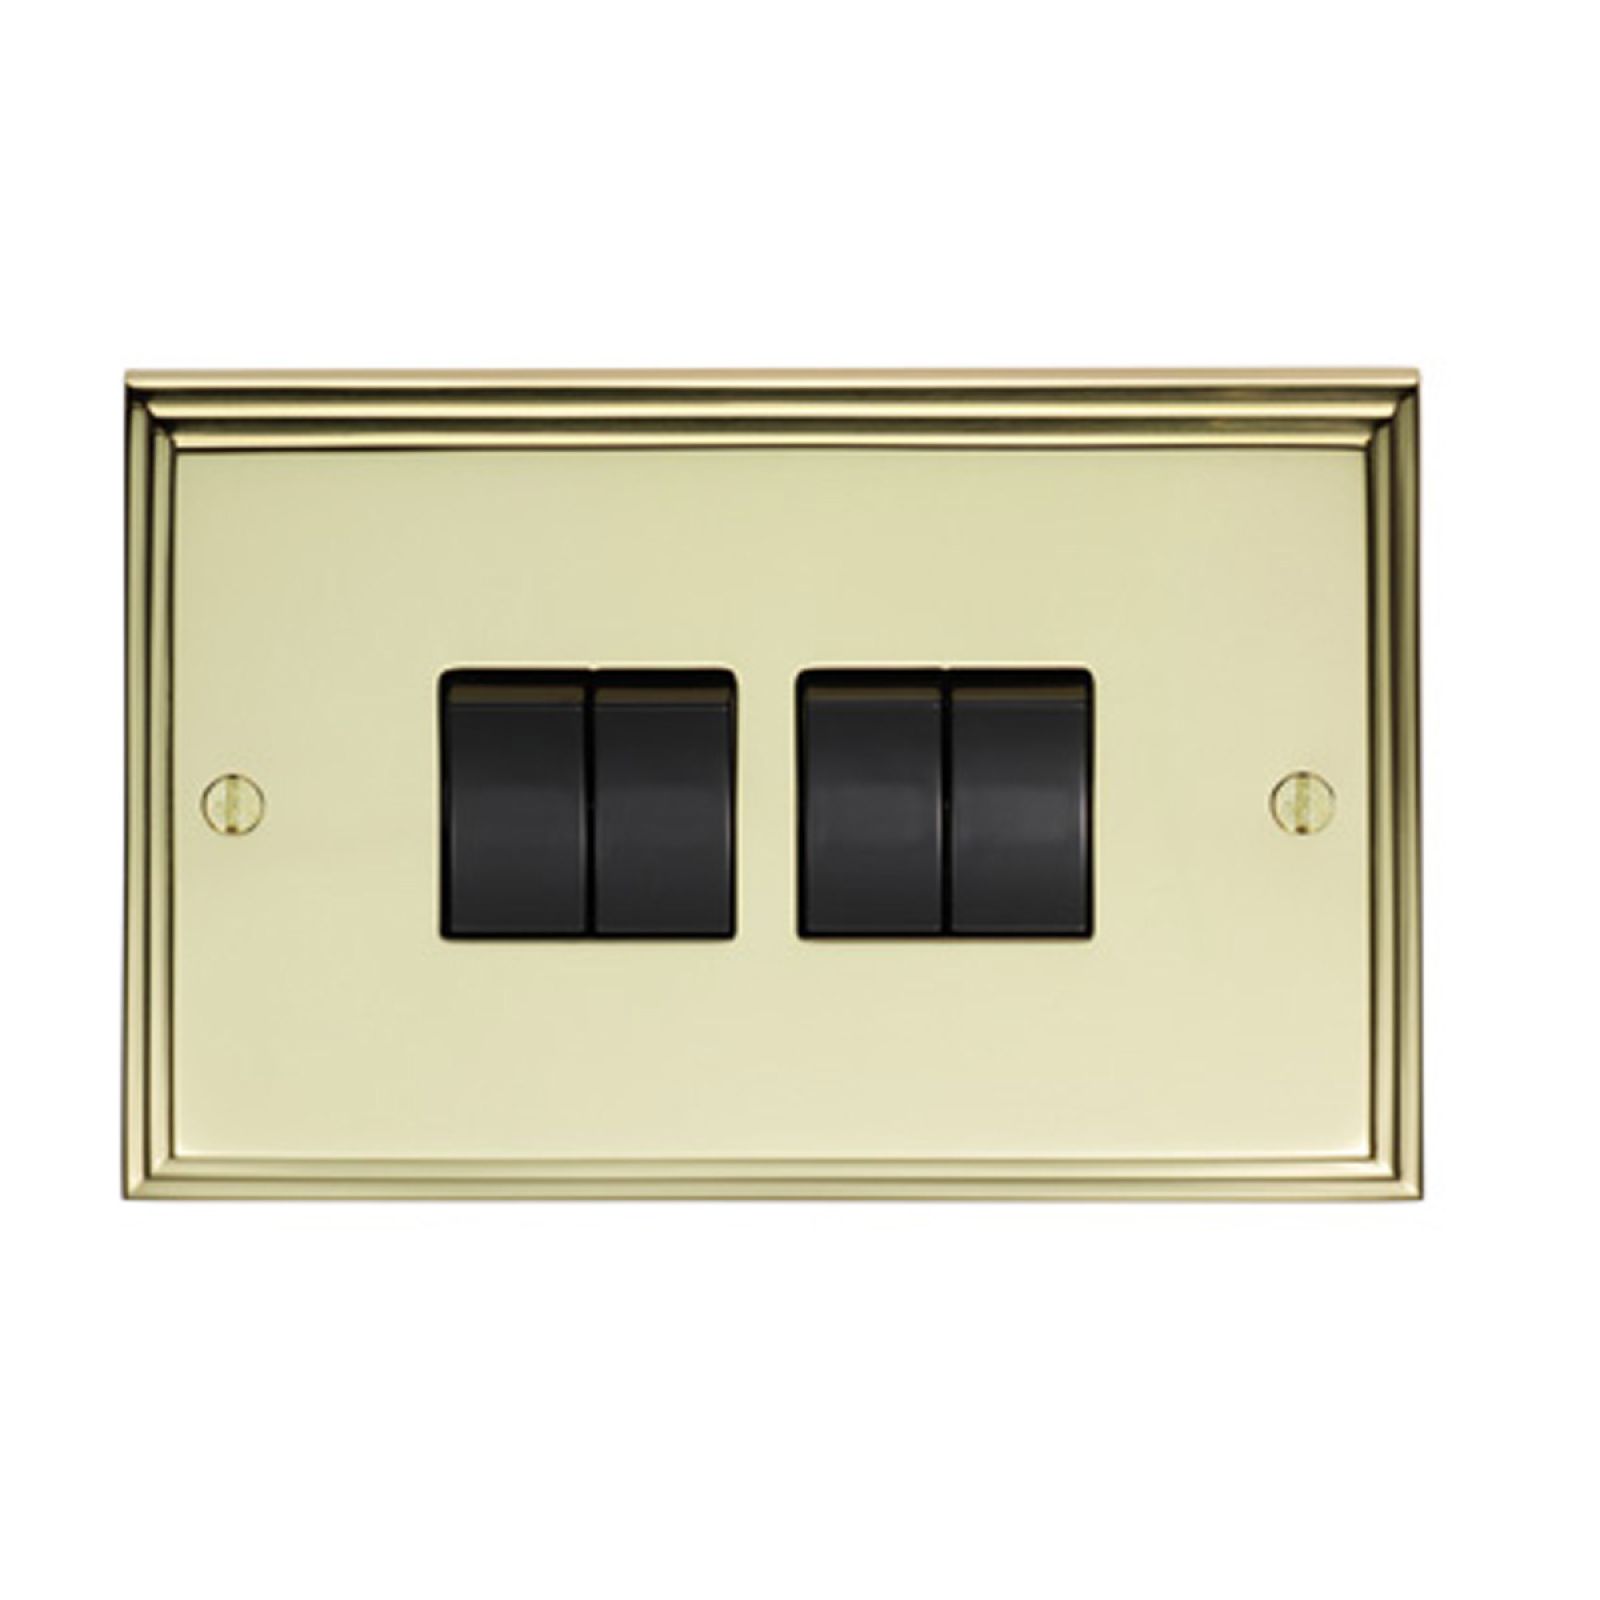 Stepped 4 Gang 10amp 2way Switch - brass, chrome or satin chrome